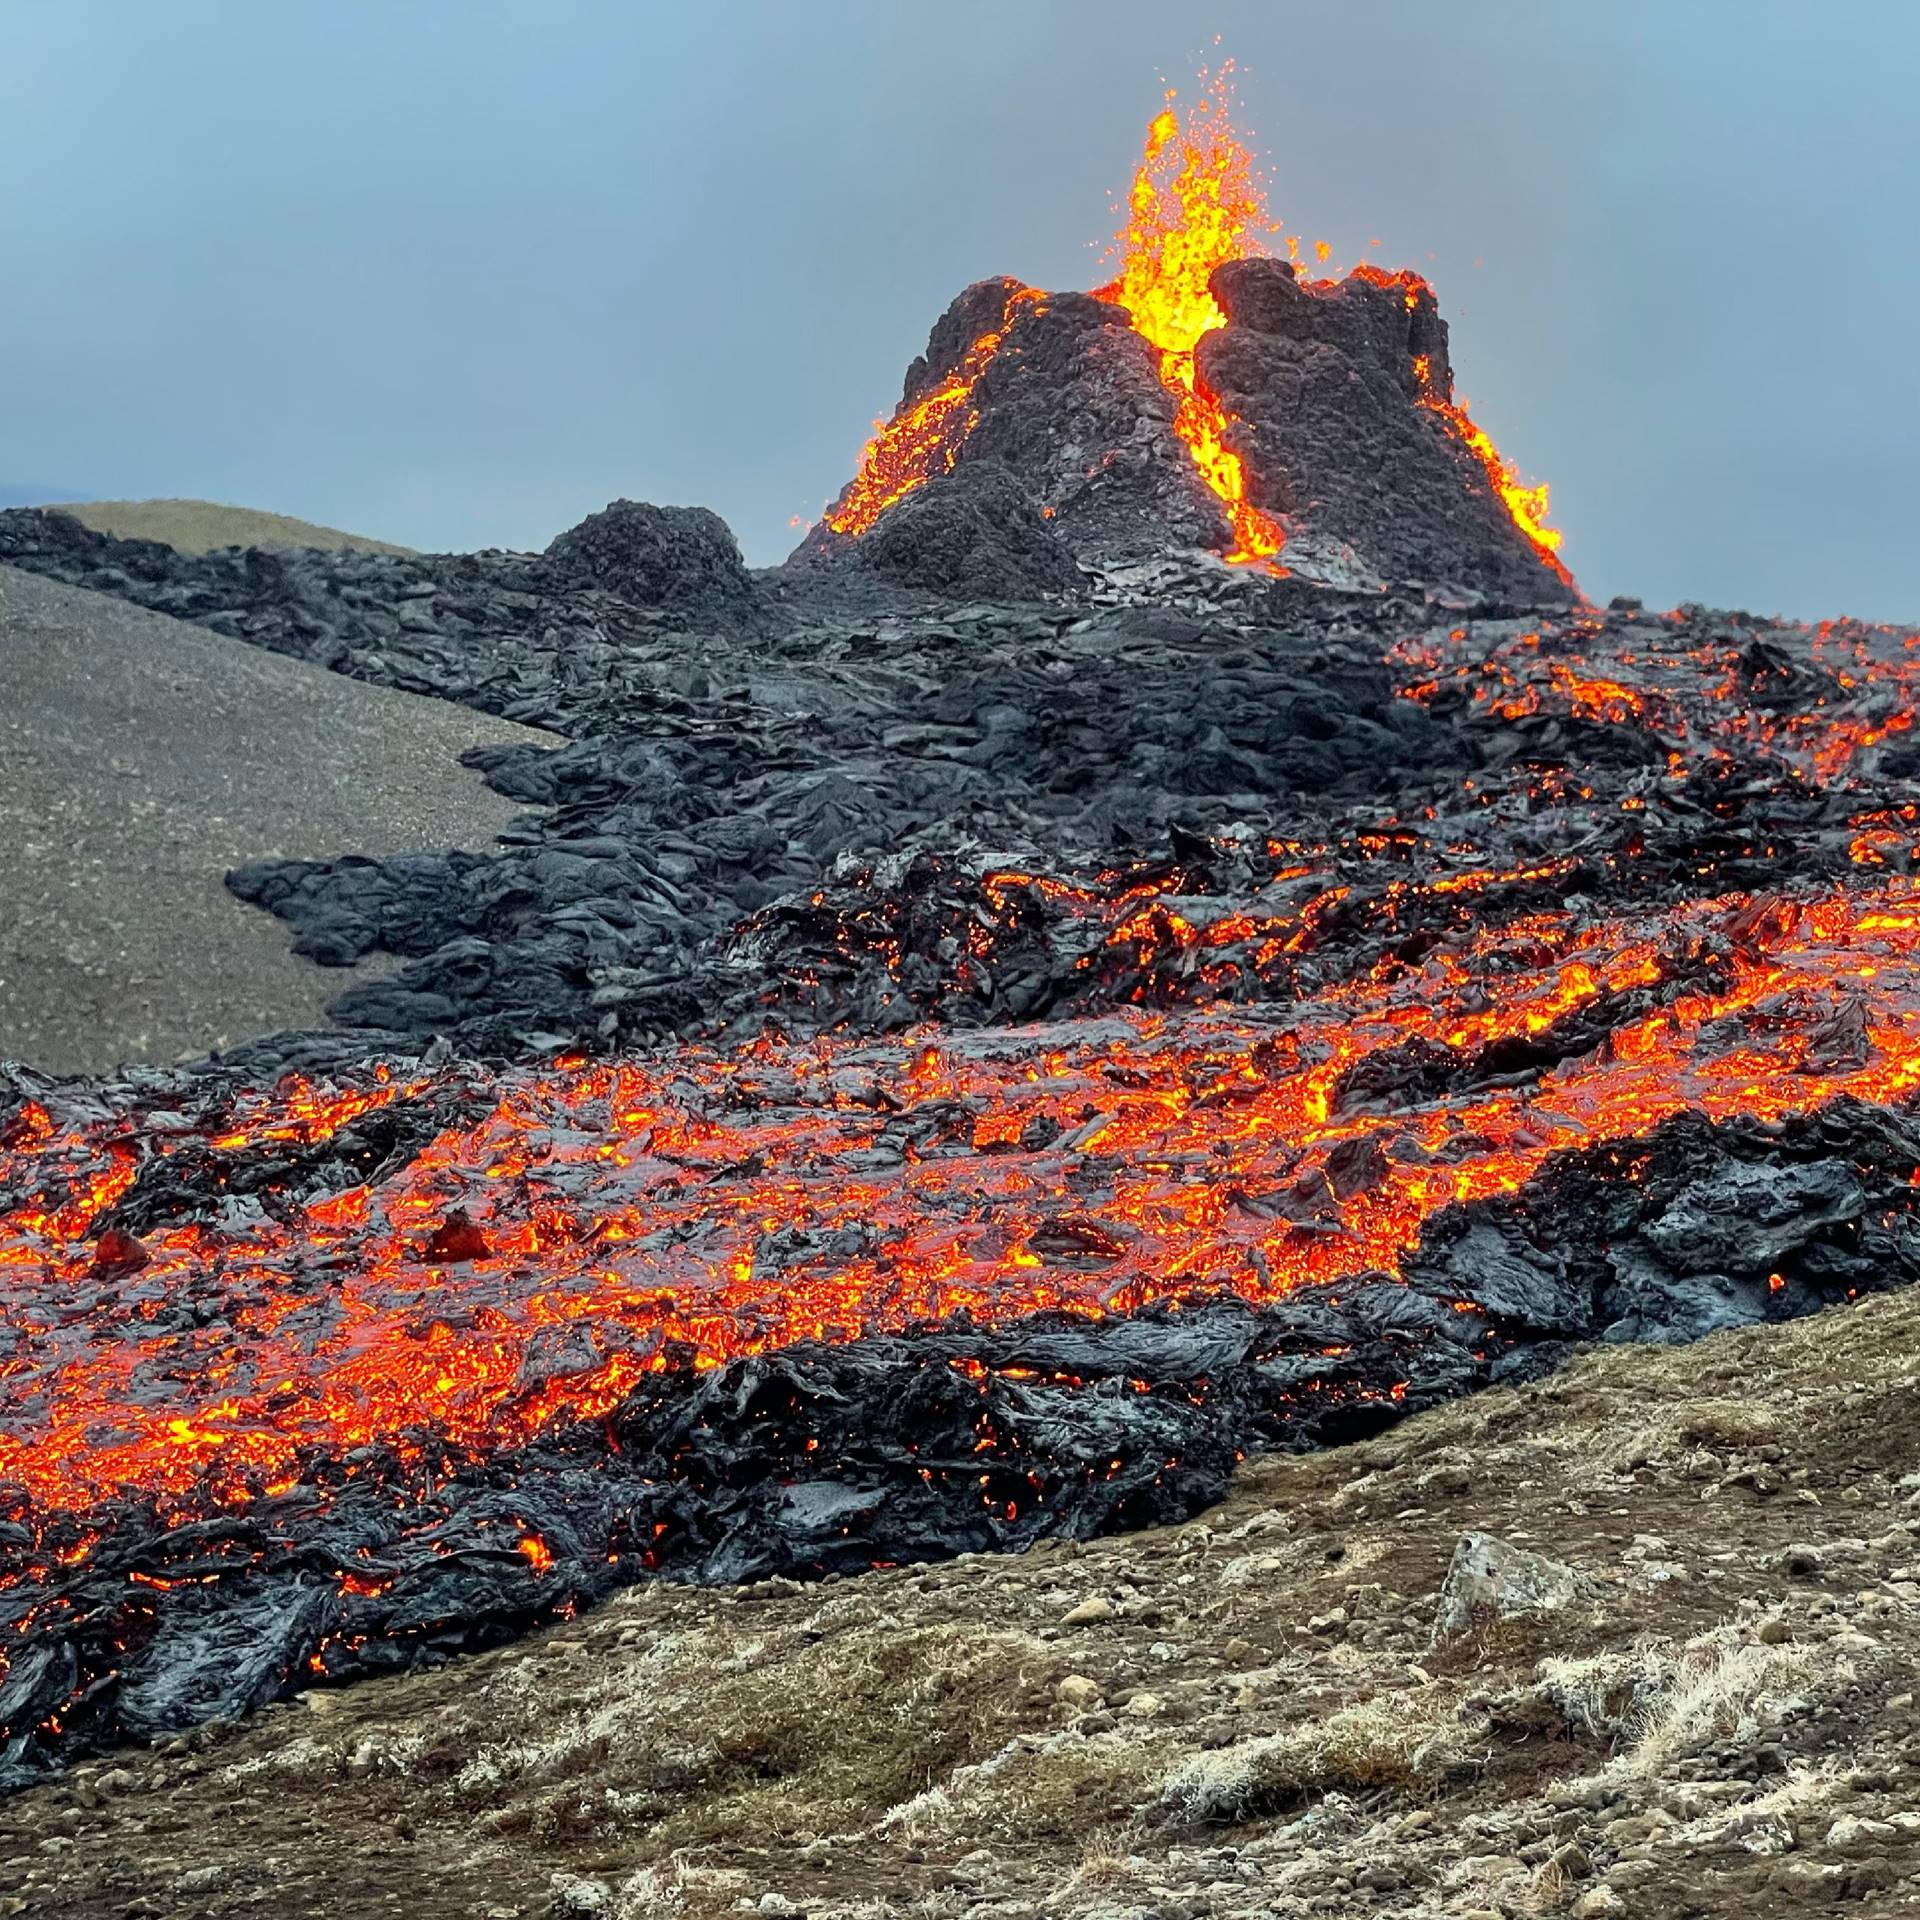 A small volcanic eruption has started in Iceland - mynd